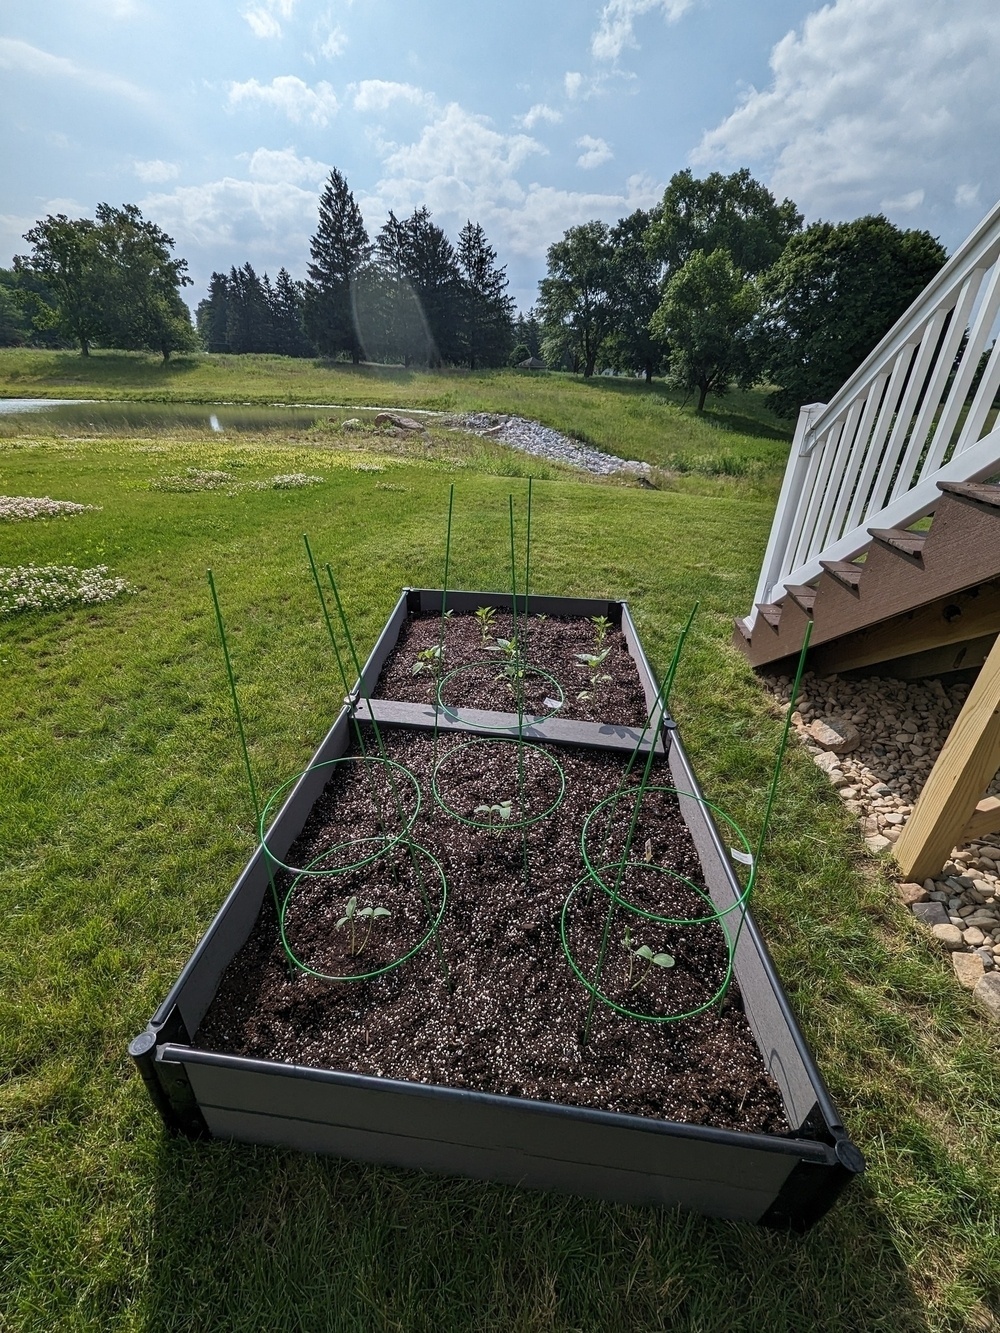 A 4x8 raised bed garden with grass and a pond in the background.